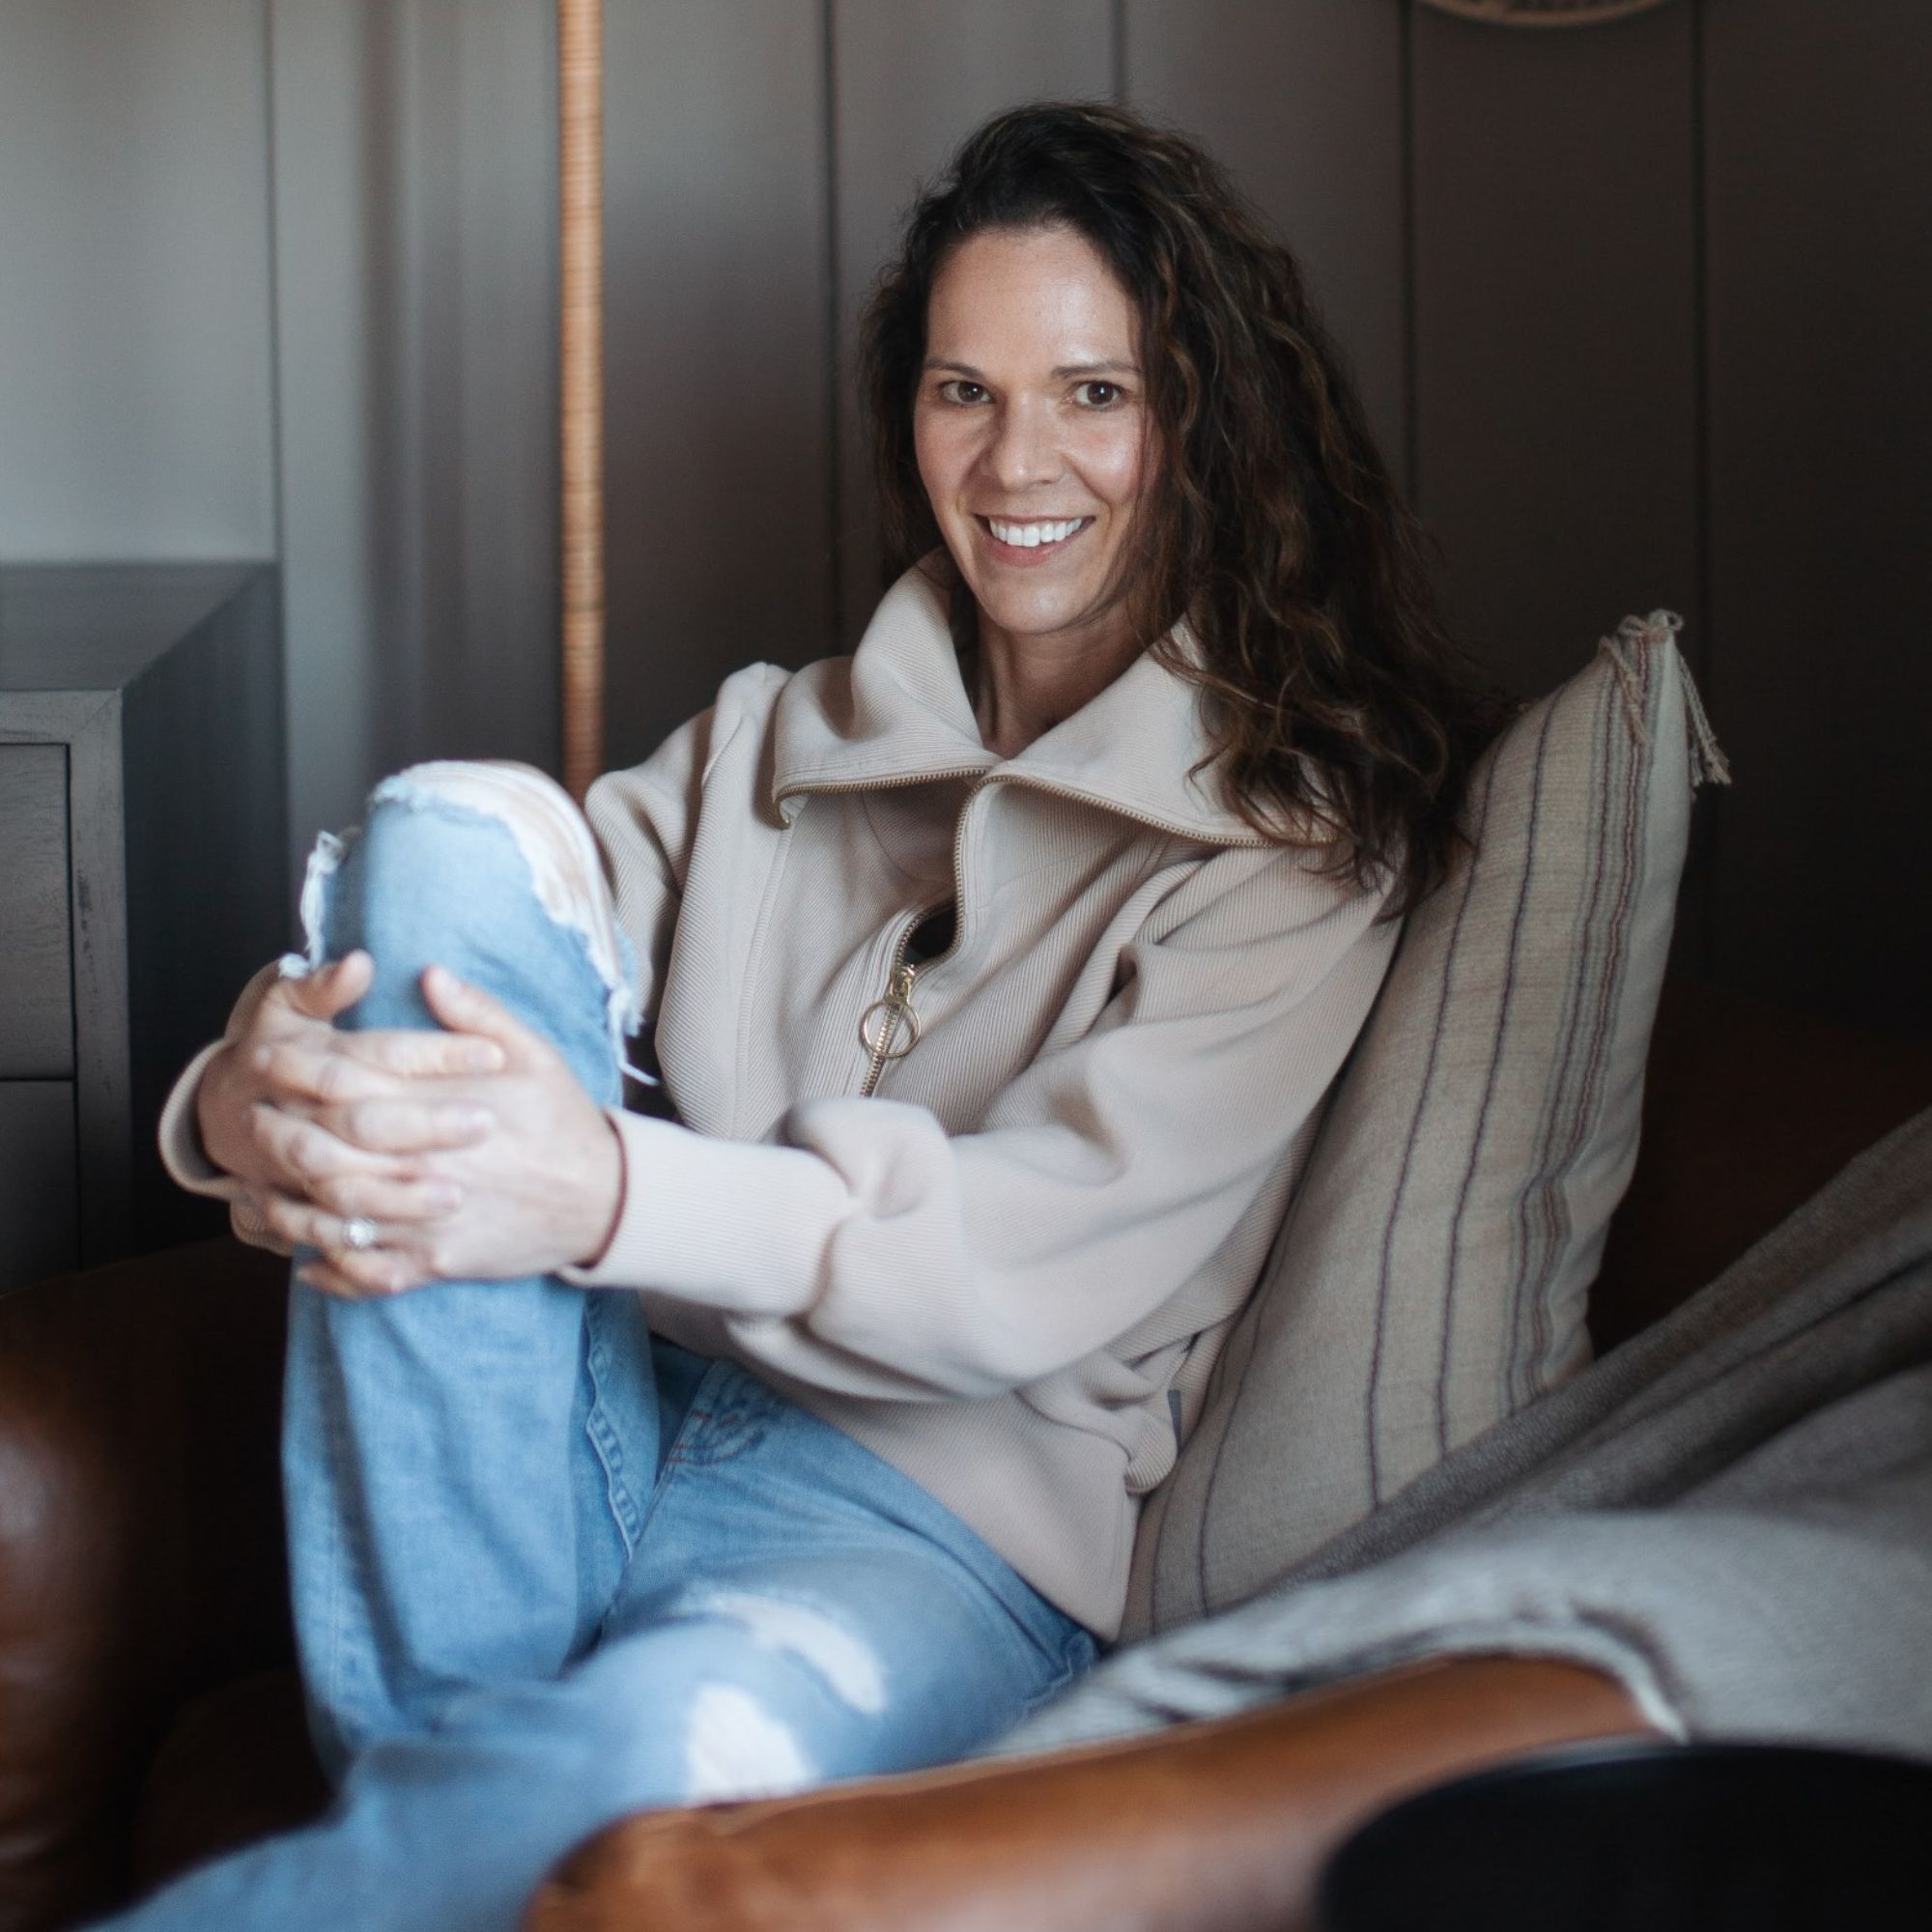 A picture of Amanda Wyatt, a woman with brown hair wearing a cream jacket with light blue ripped jeans on, sitting on a light brown leather armchair with a large gray throw pillow behind her